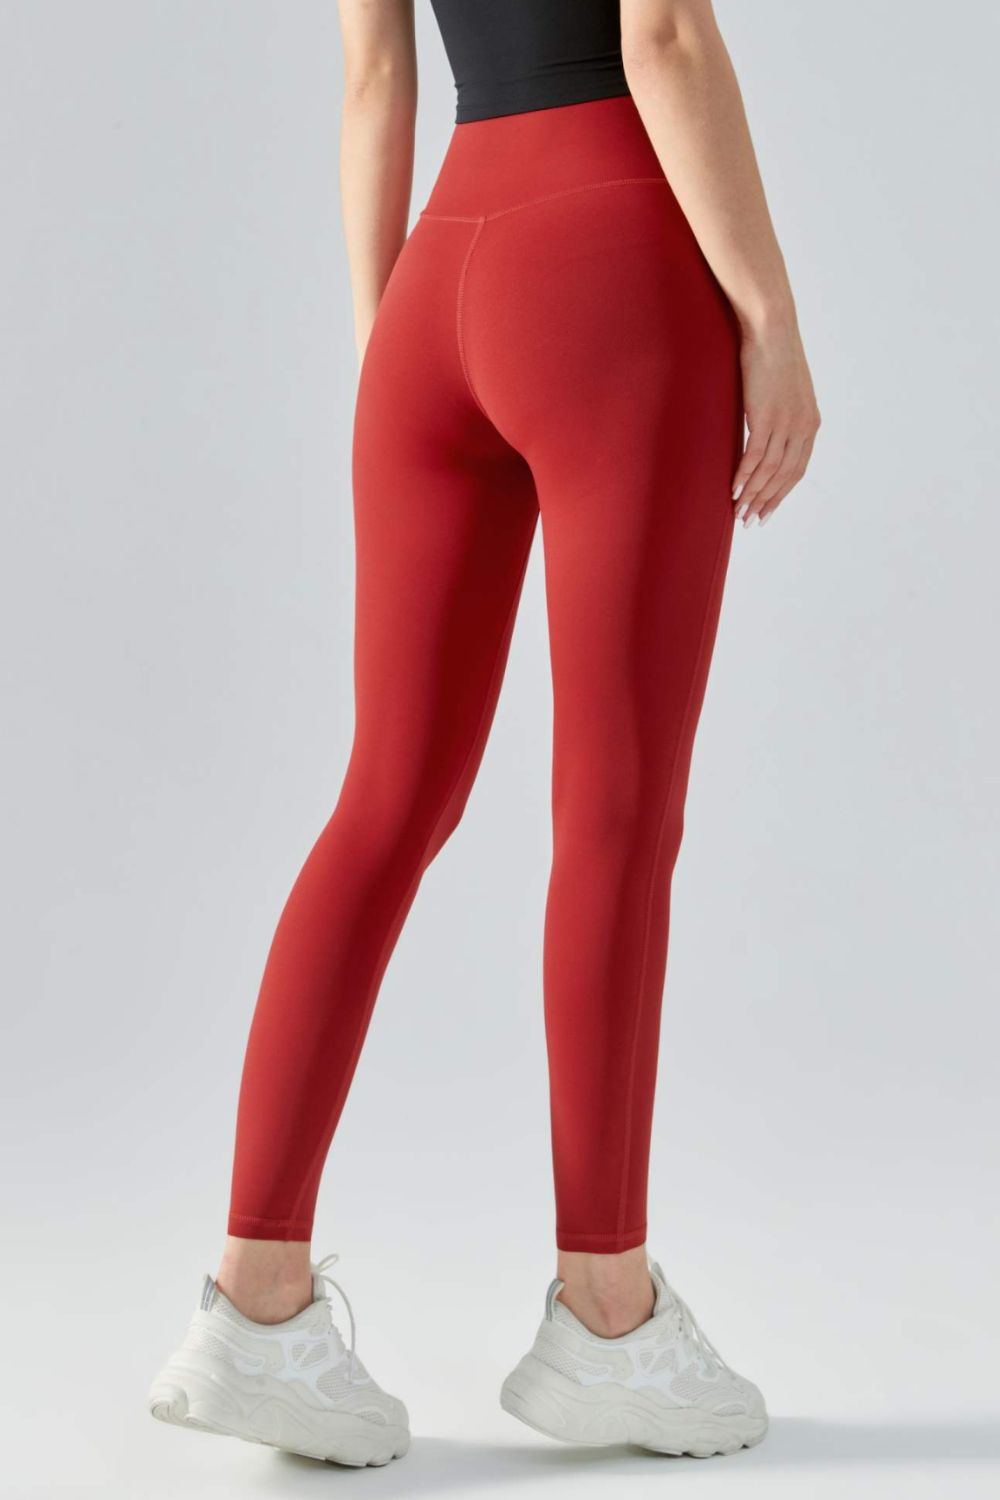 Barely There Fitness Leggings